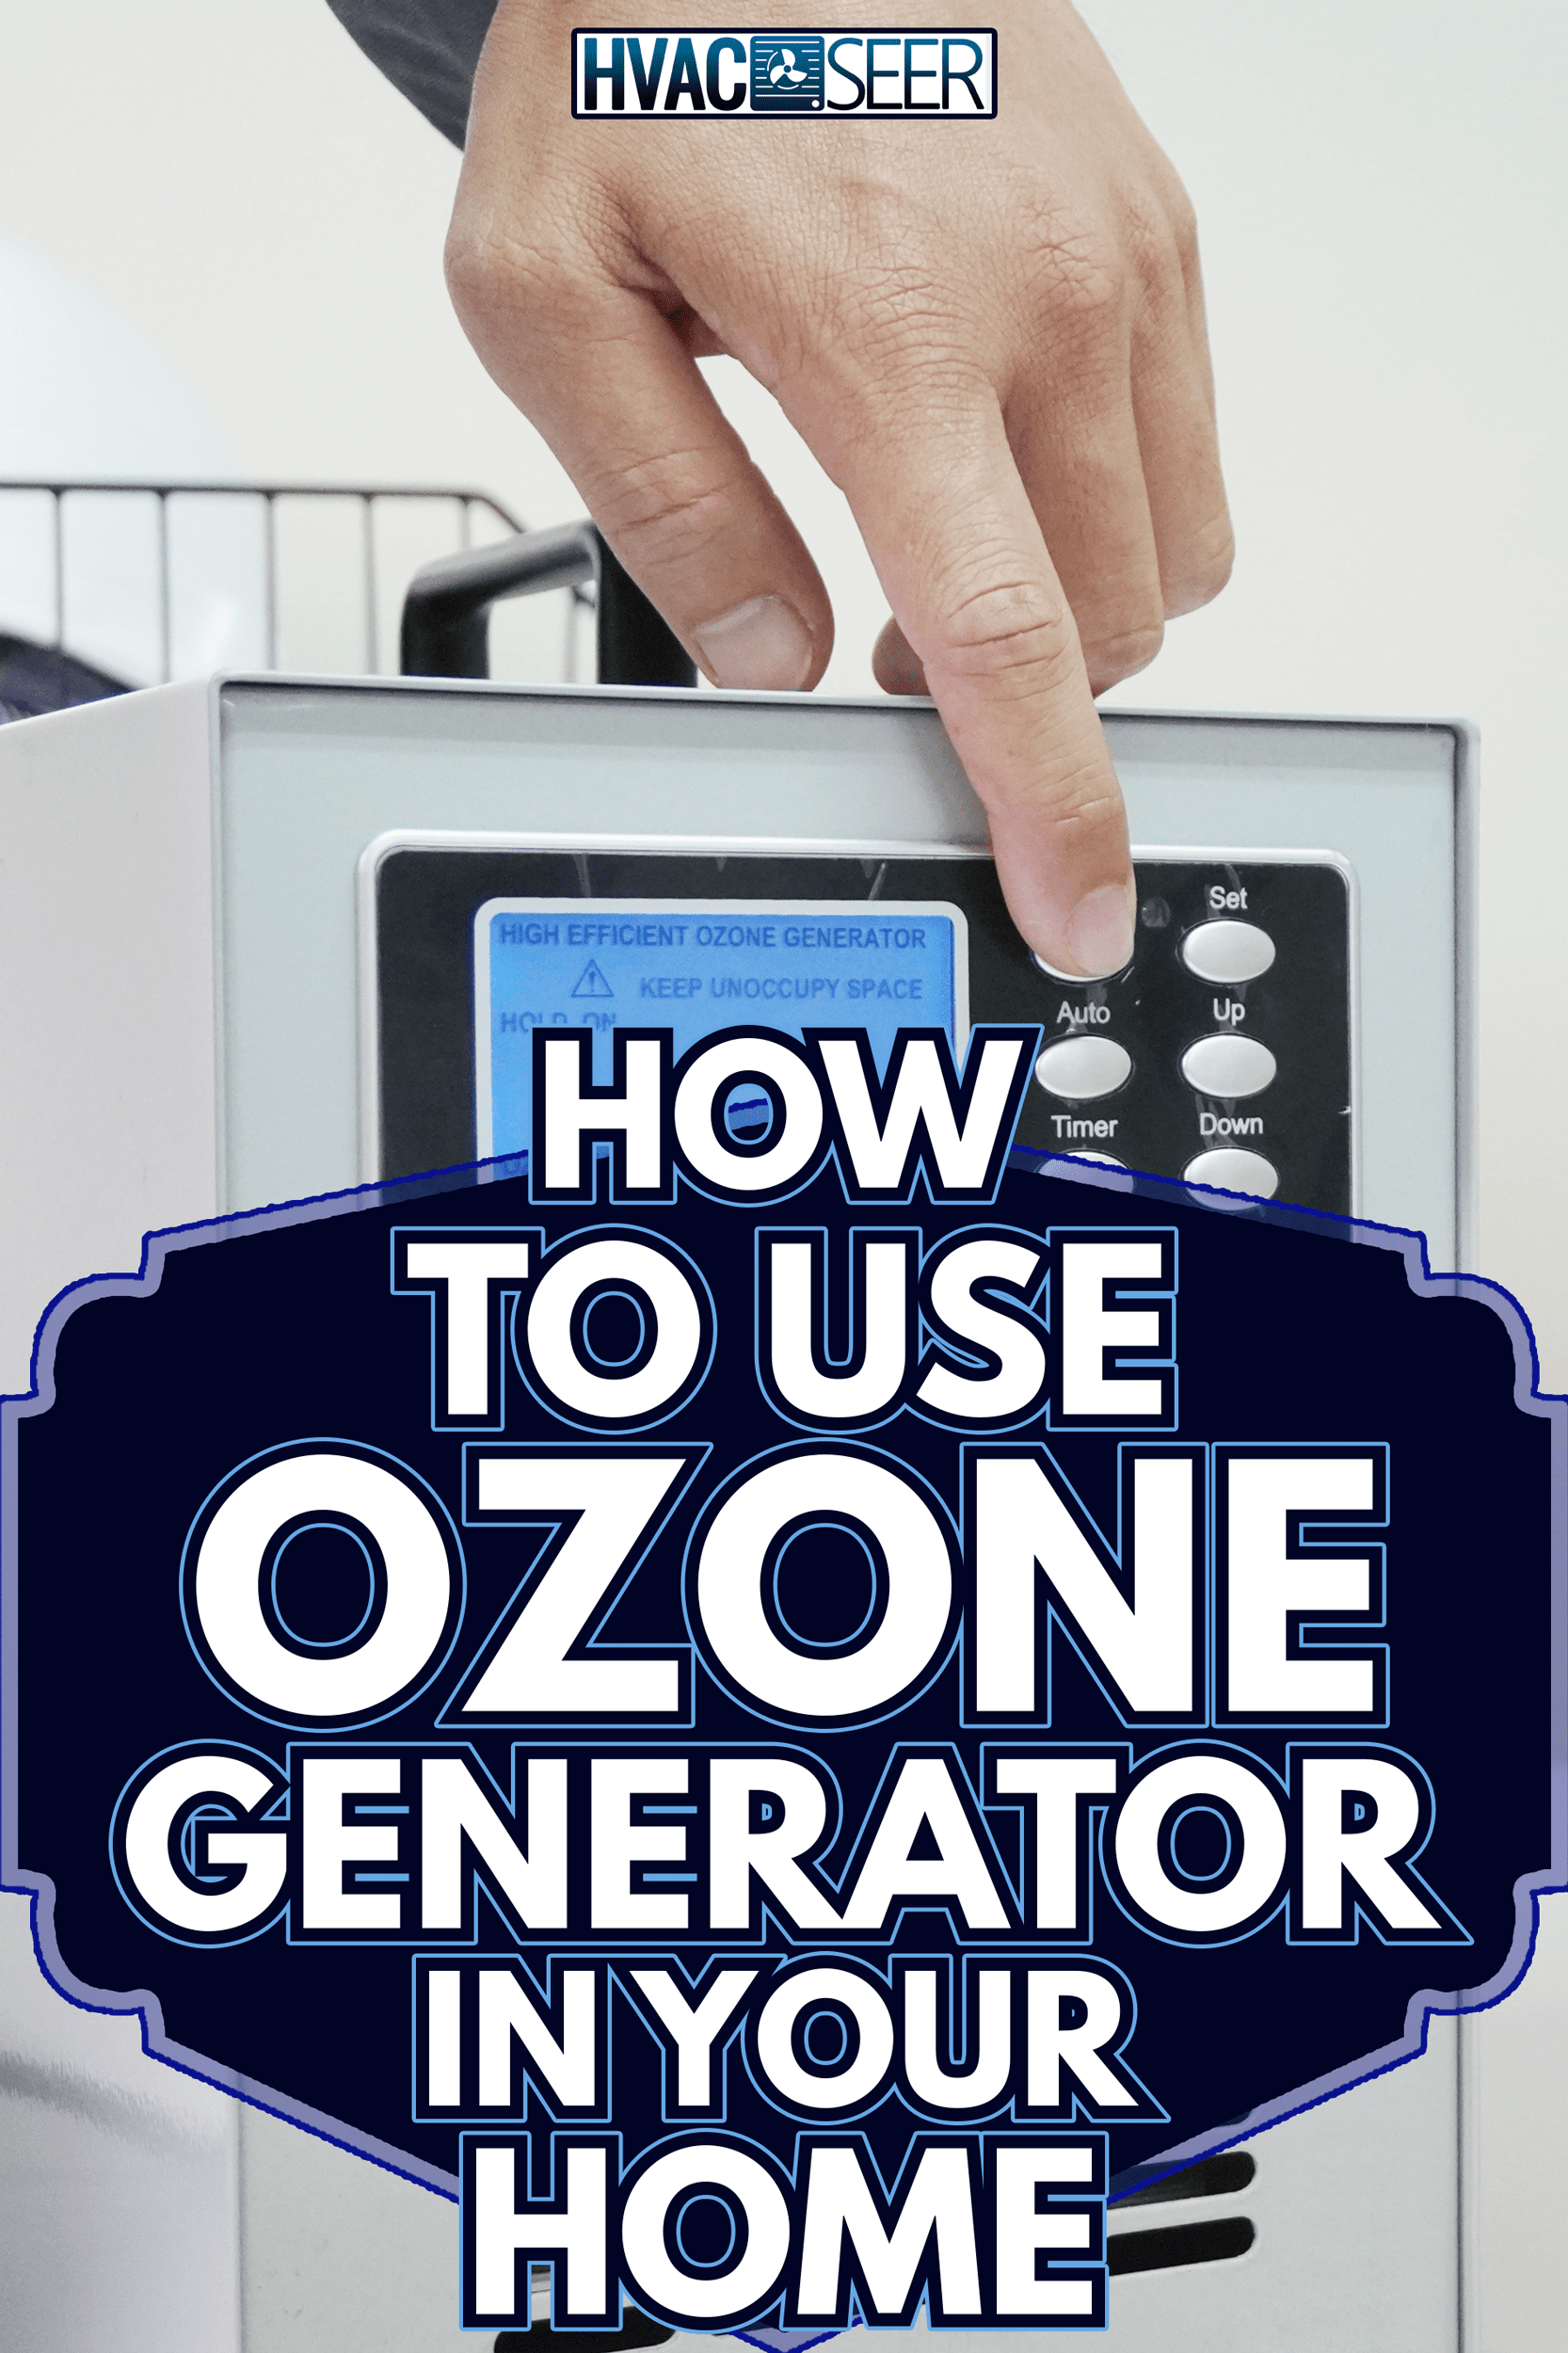 Ozone generators placed on the table in office room to cleaning and disinfection during corona-virus epidemic - How To Use Ozone Generator In Your Home